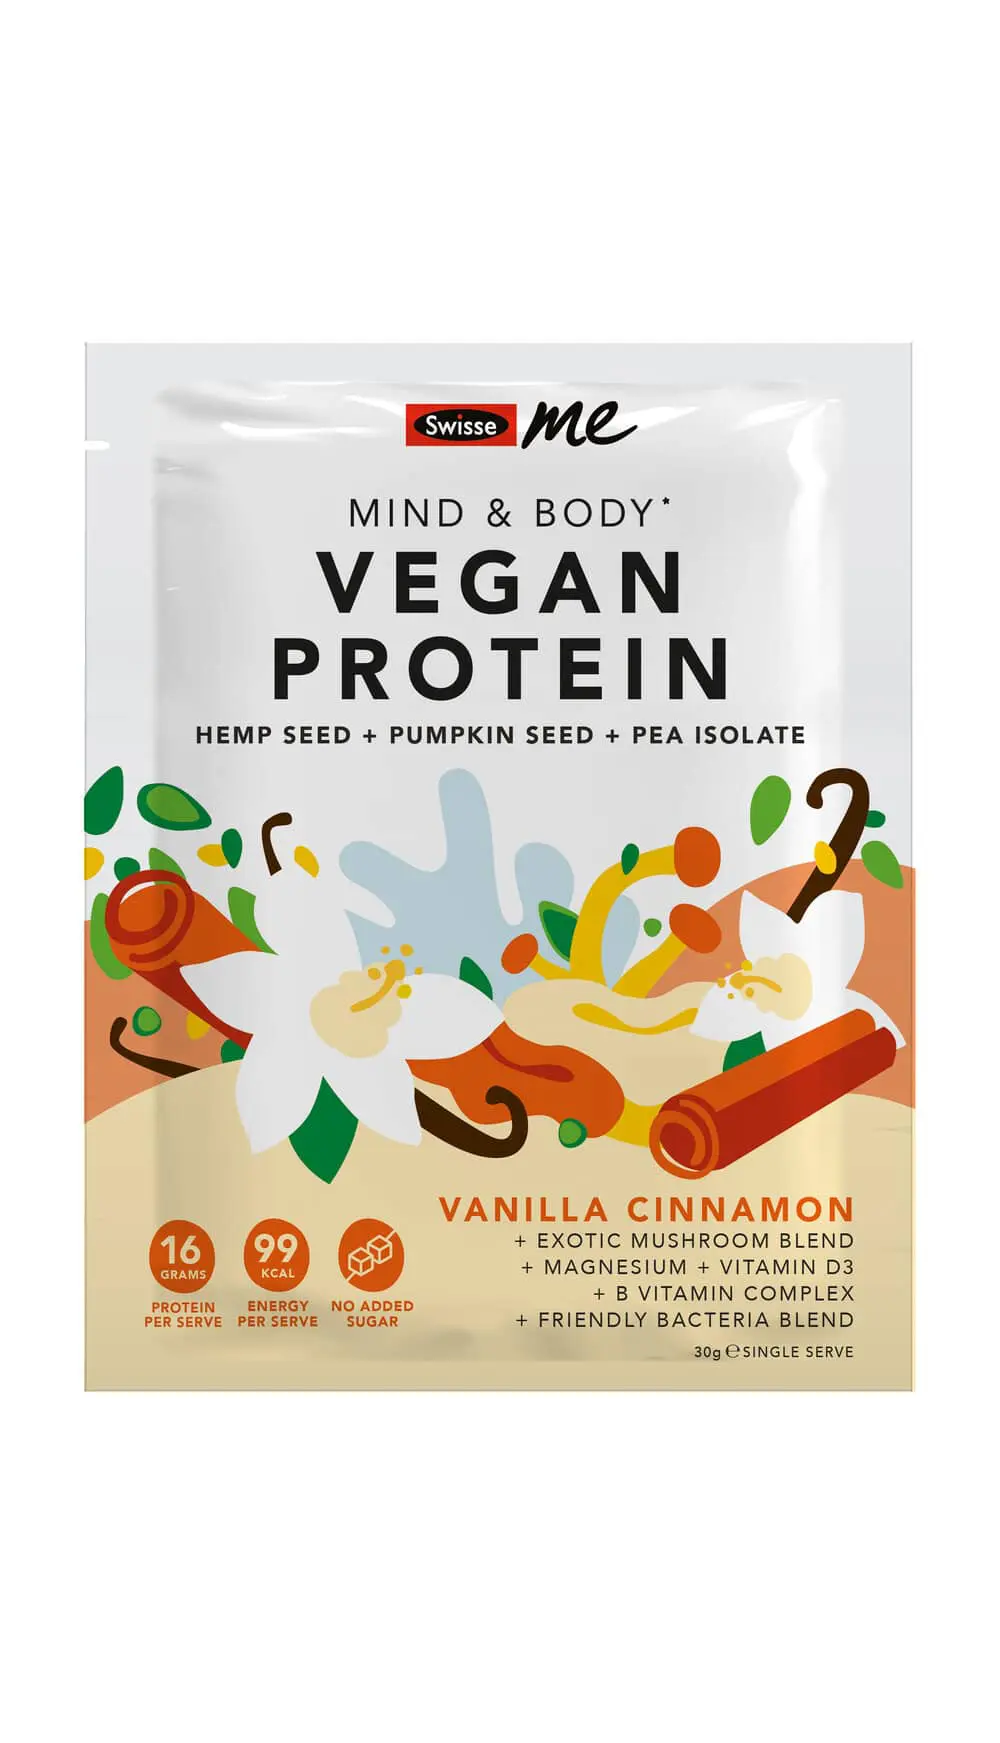 Swisse me launches two new vegan protein products – powder and balls!